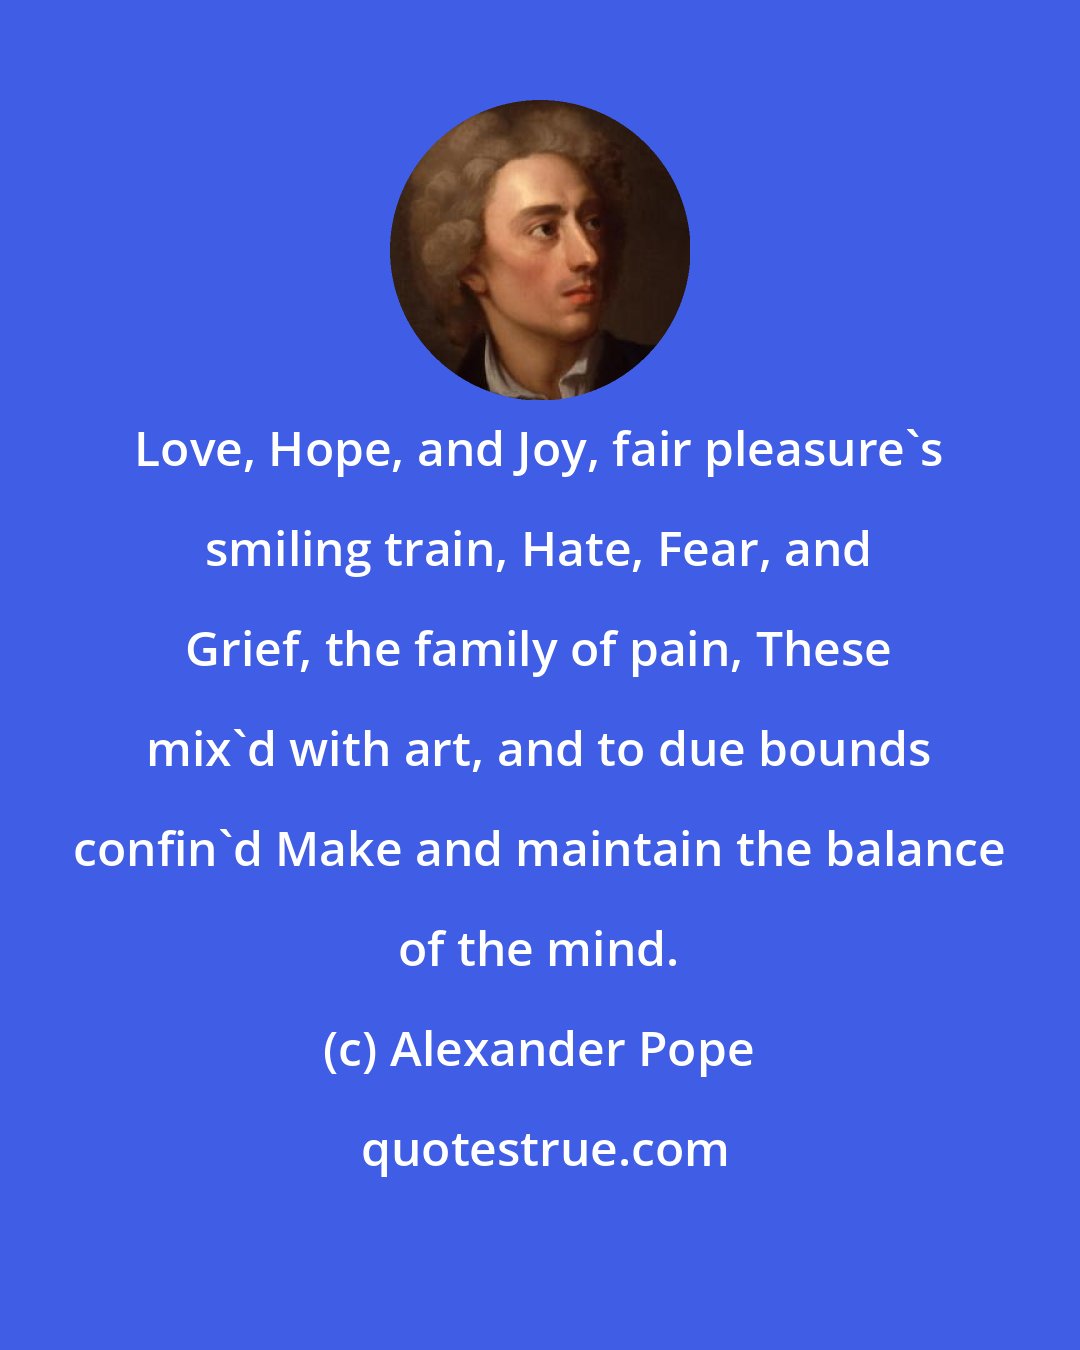 Alexander Pope: Love, Hope, and Joy, fair pleasure's smiling train, Hate, Fear, and Grief, the family of pain, These mix'd with art, and to due bounds confin'd Make and maintain the balance of the mind.